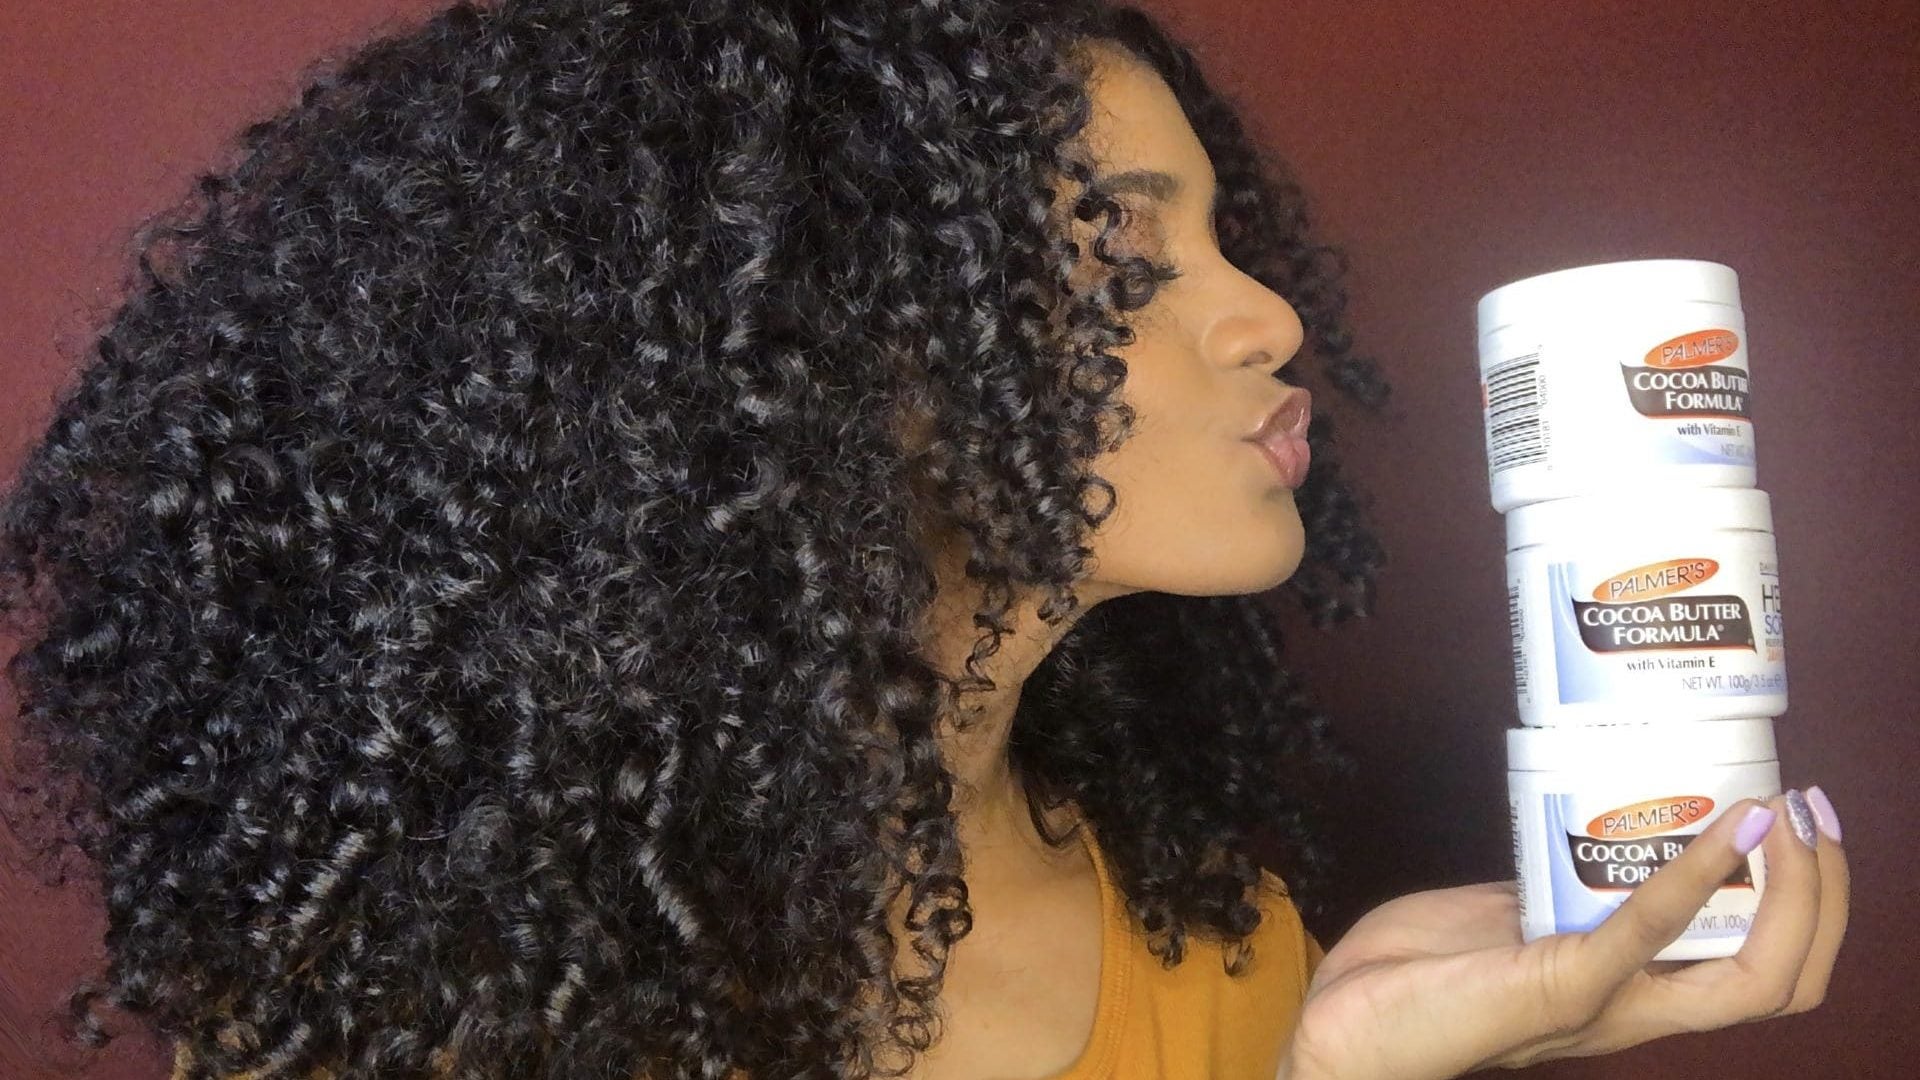 Flawless, darling! Beauty guru Lauryn Muir helps us maintain our beauty regimen with just one product